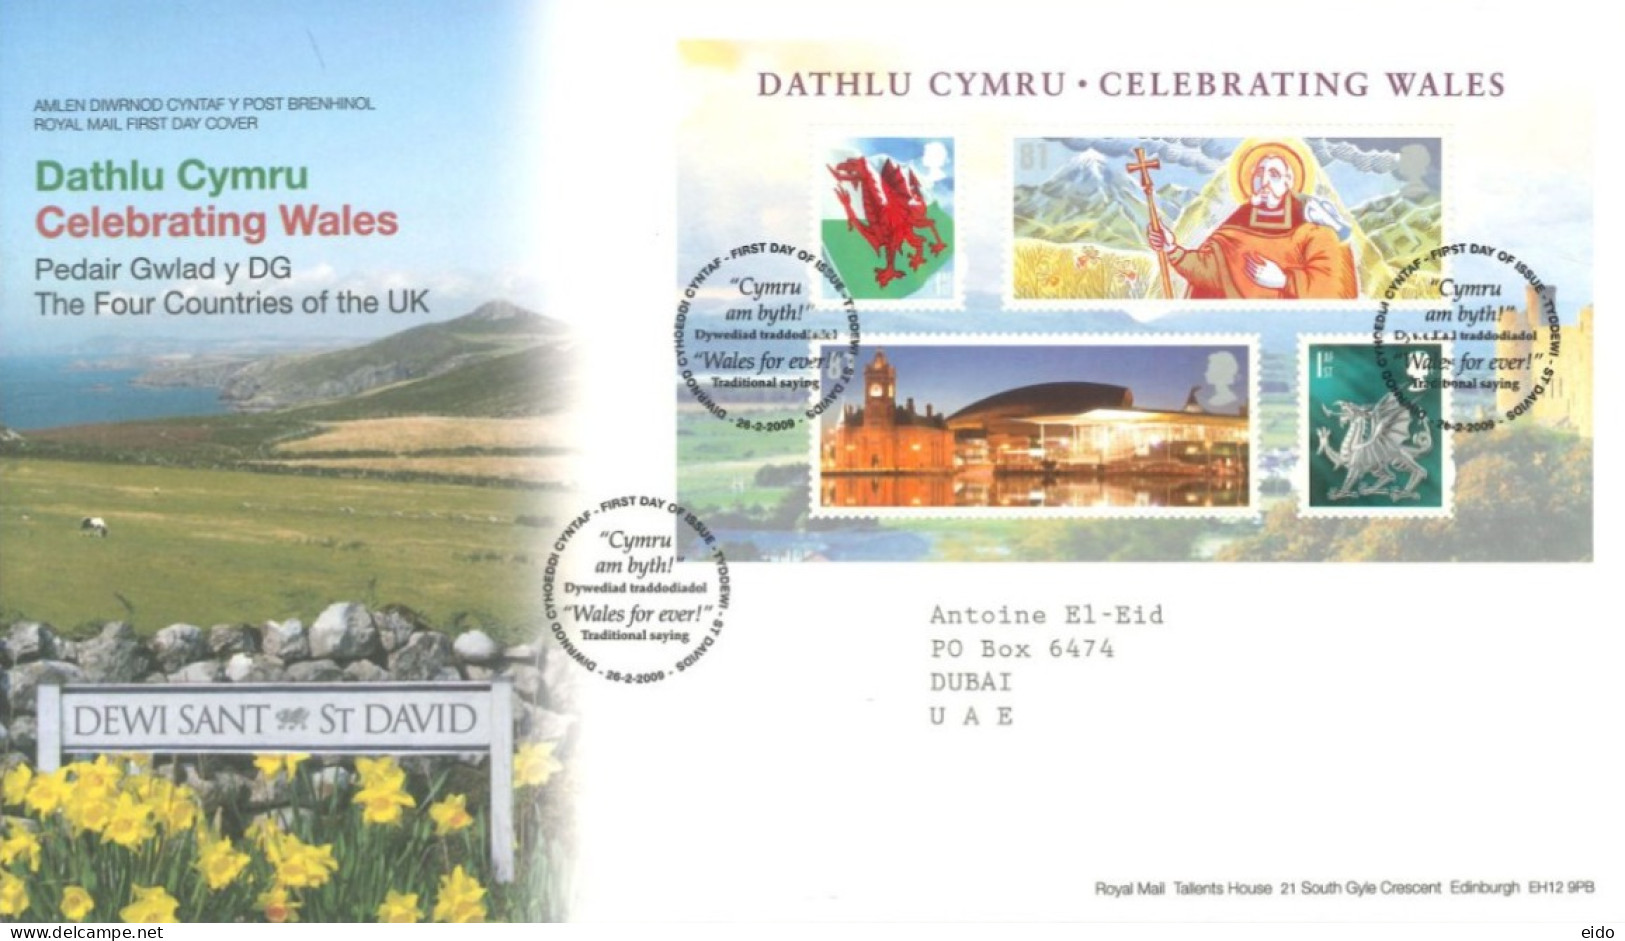 GREAT BRITAIN - 2009, FDC MINIATURE STAMPS SHEET OF DATHLU CYMRU CEEBRATING WALES. - Covers & Documents